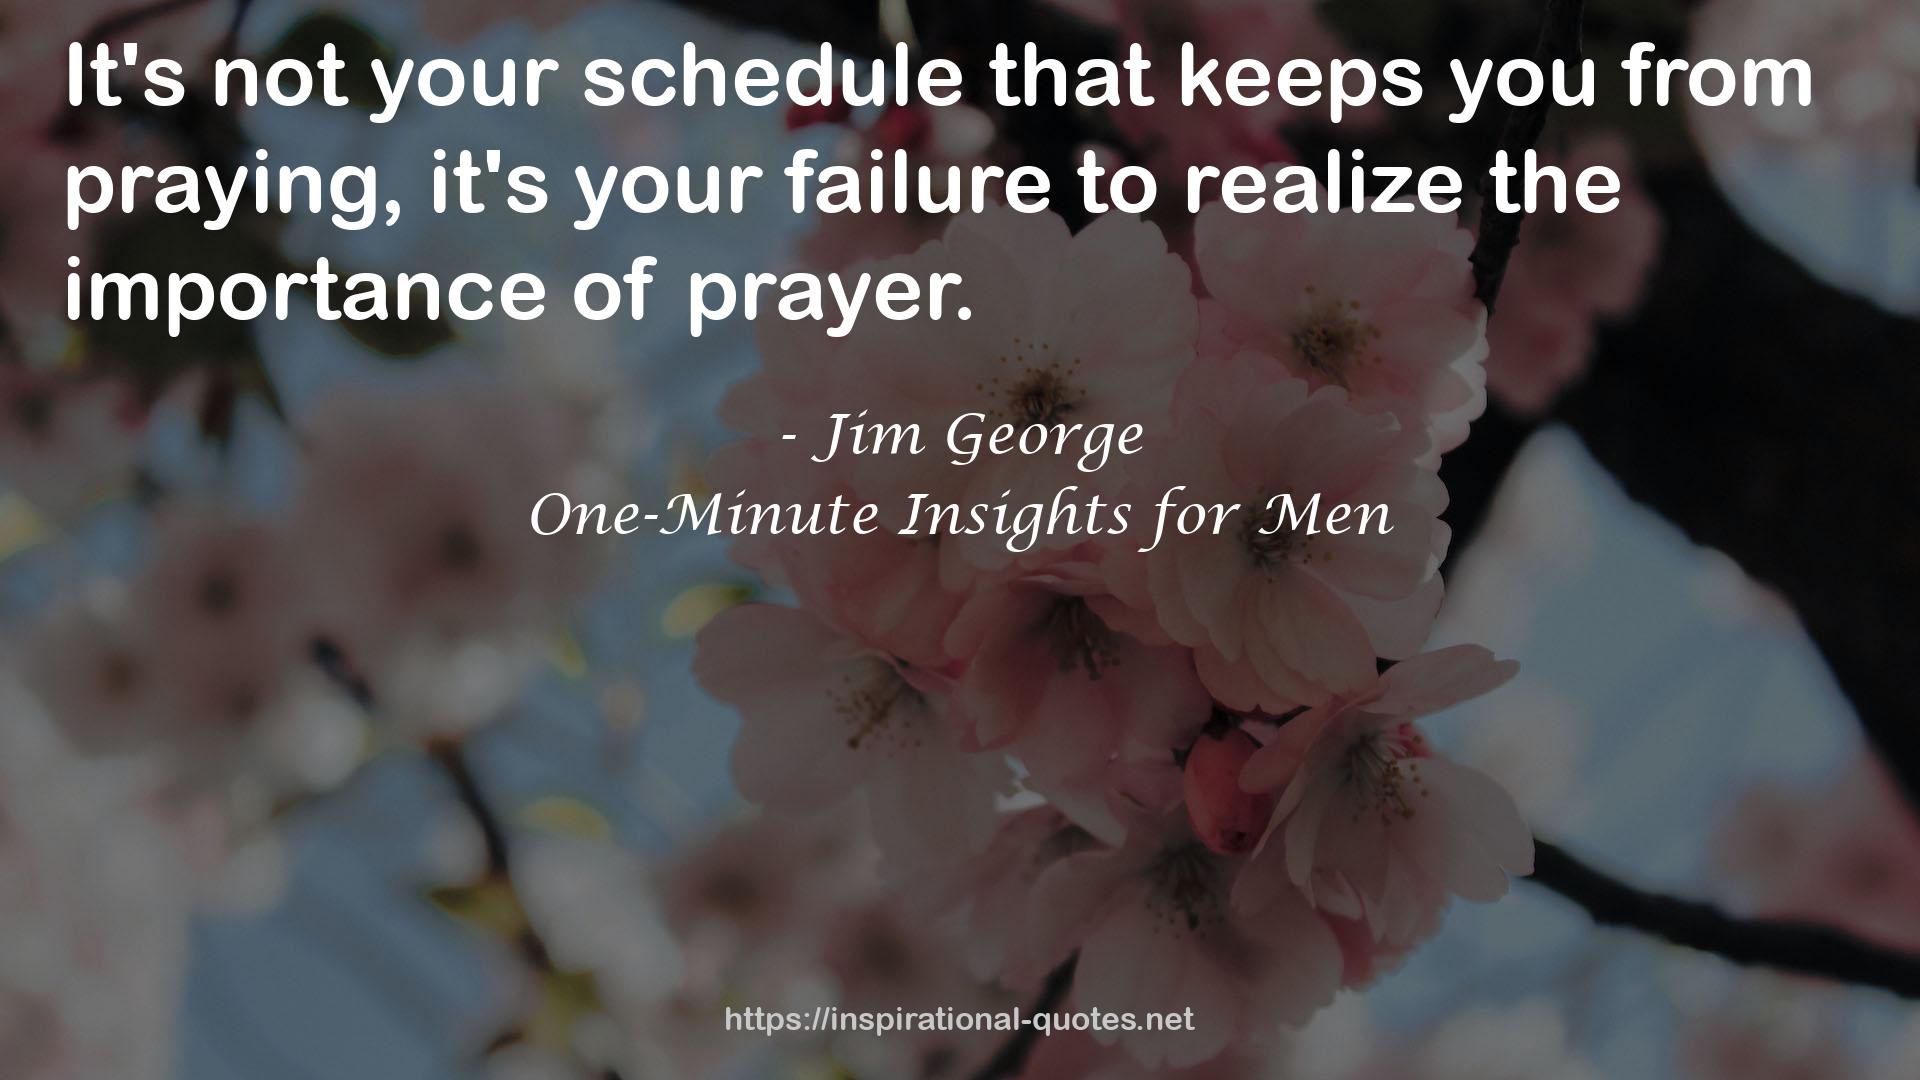 One-Minute Insights for Men QUOTES